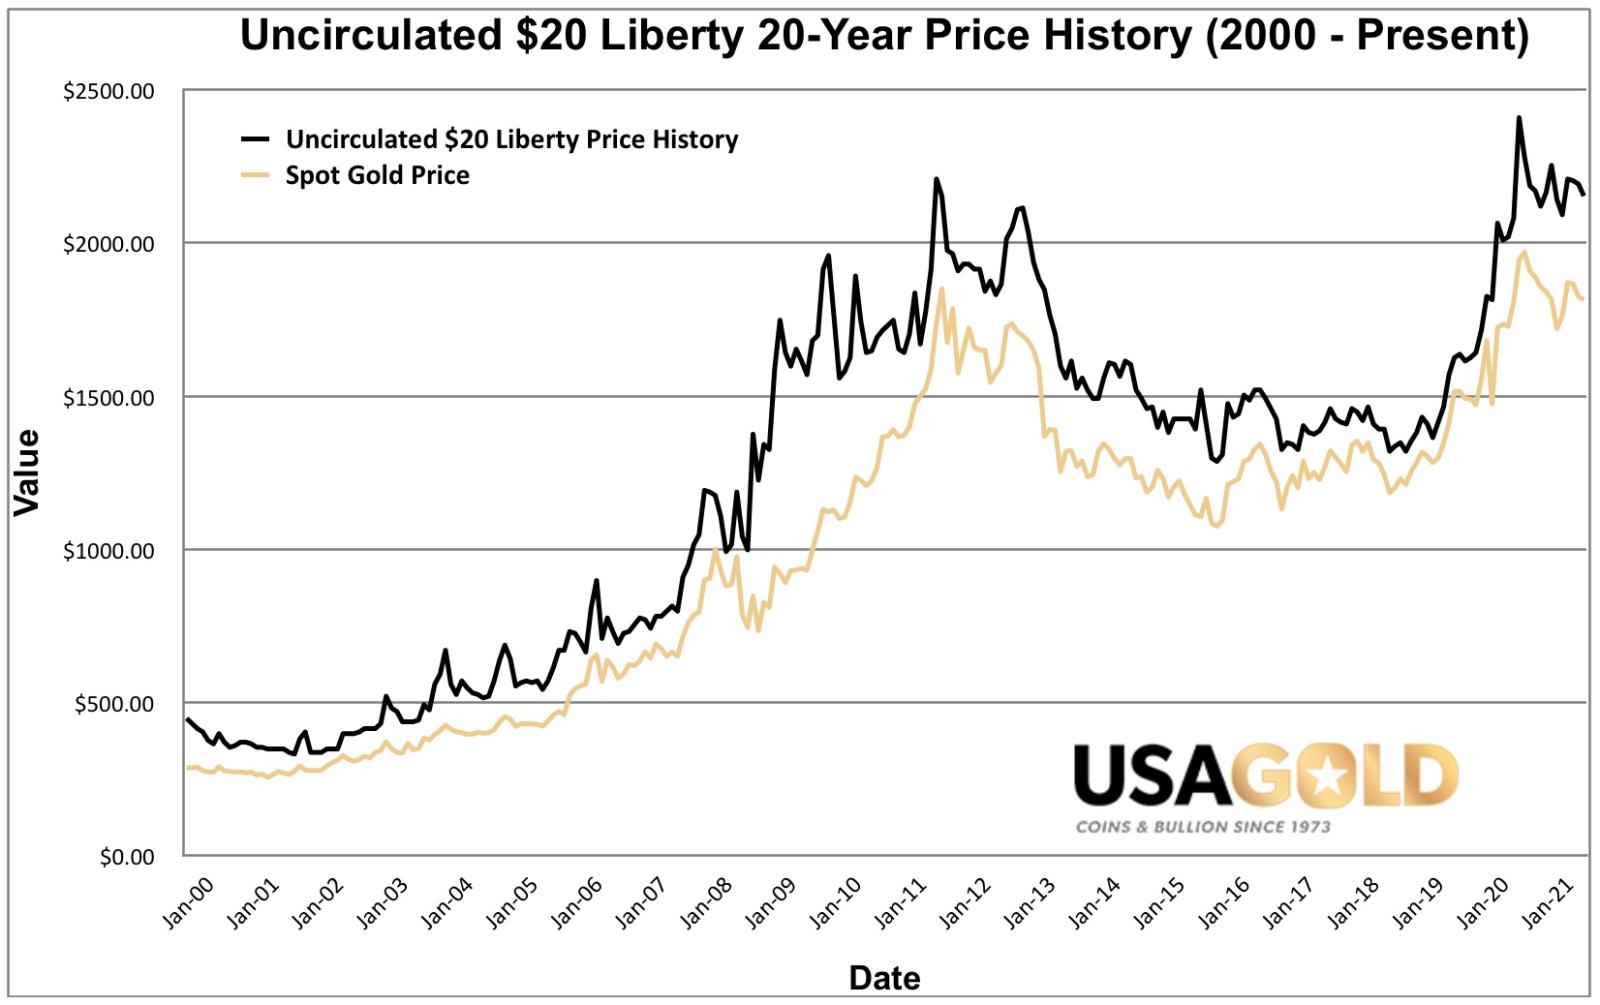 Graph of the price history for the uncirculated $20 Liberty gold coin from year 2000 to present. Also graphed is the spot price of gold for the same period